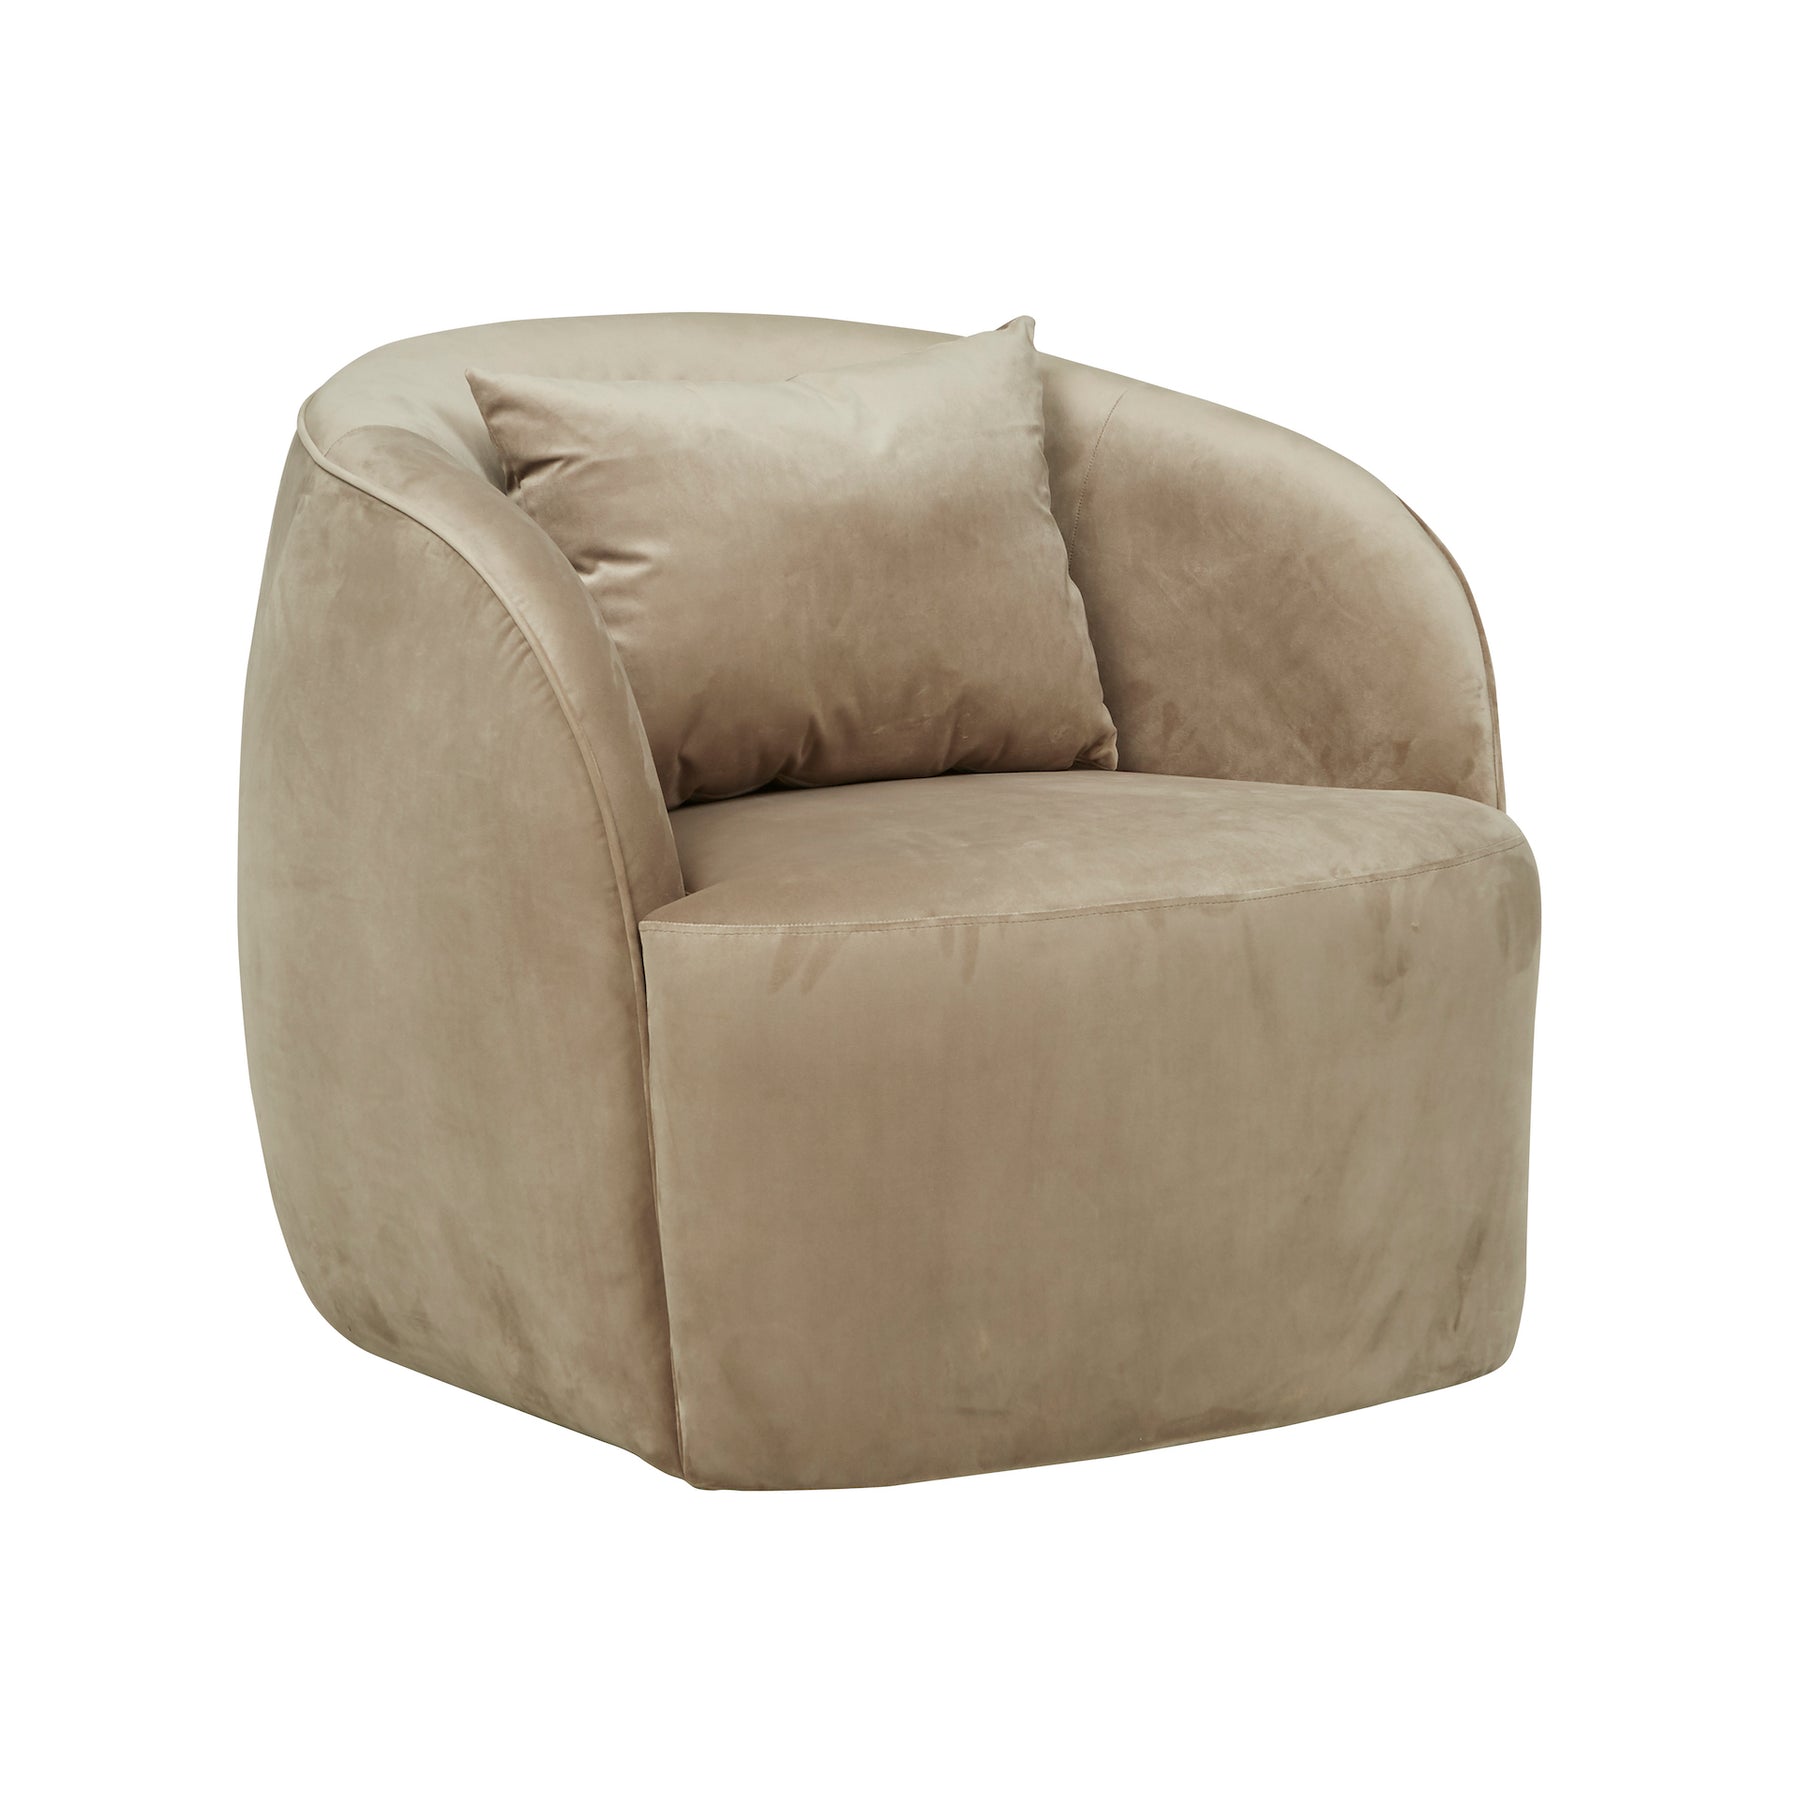 Penelope Occasional Chair